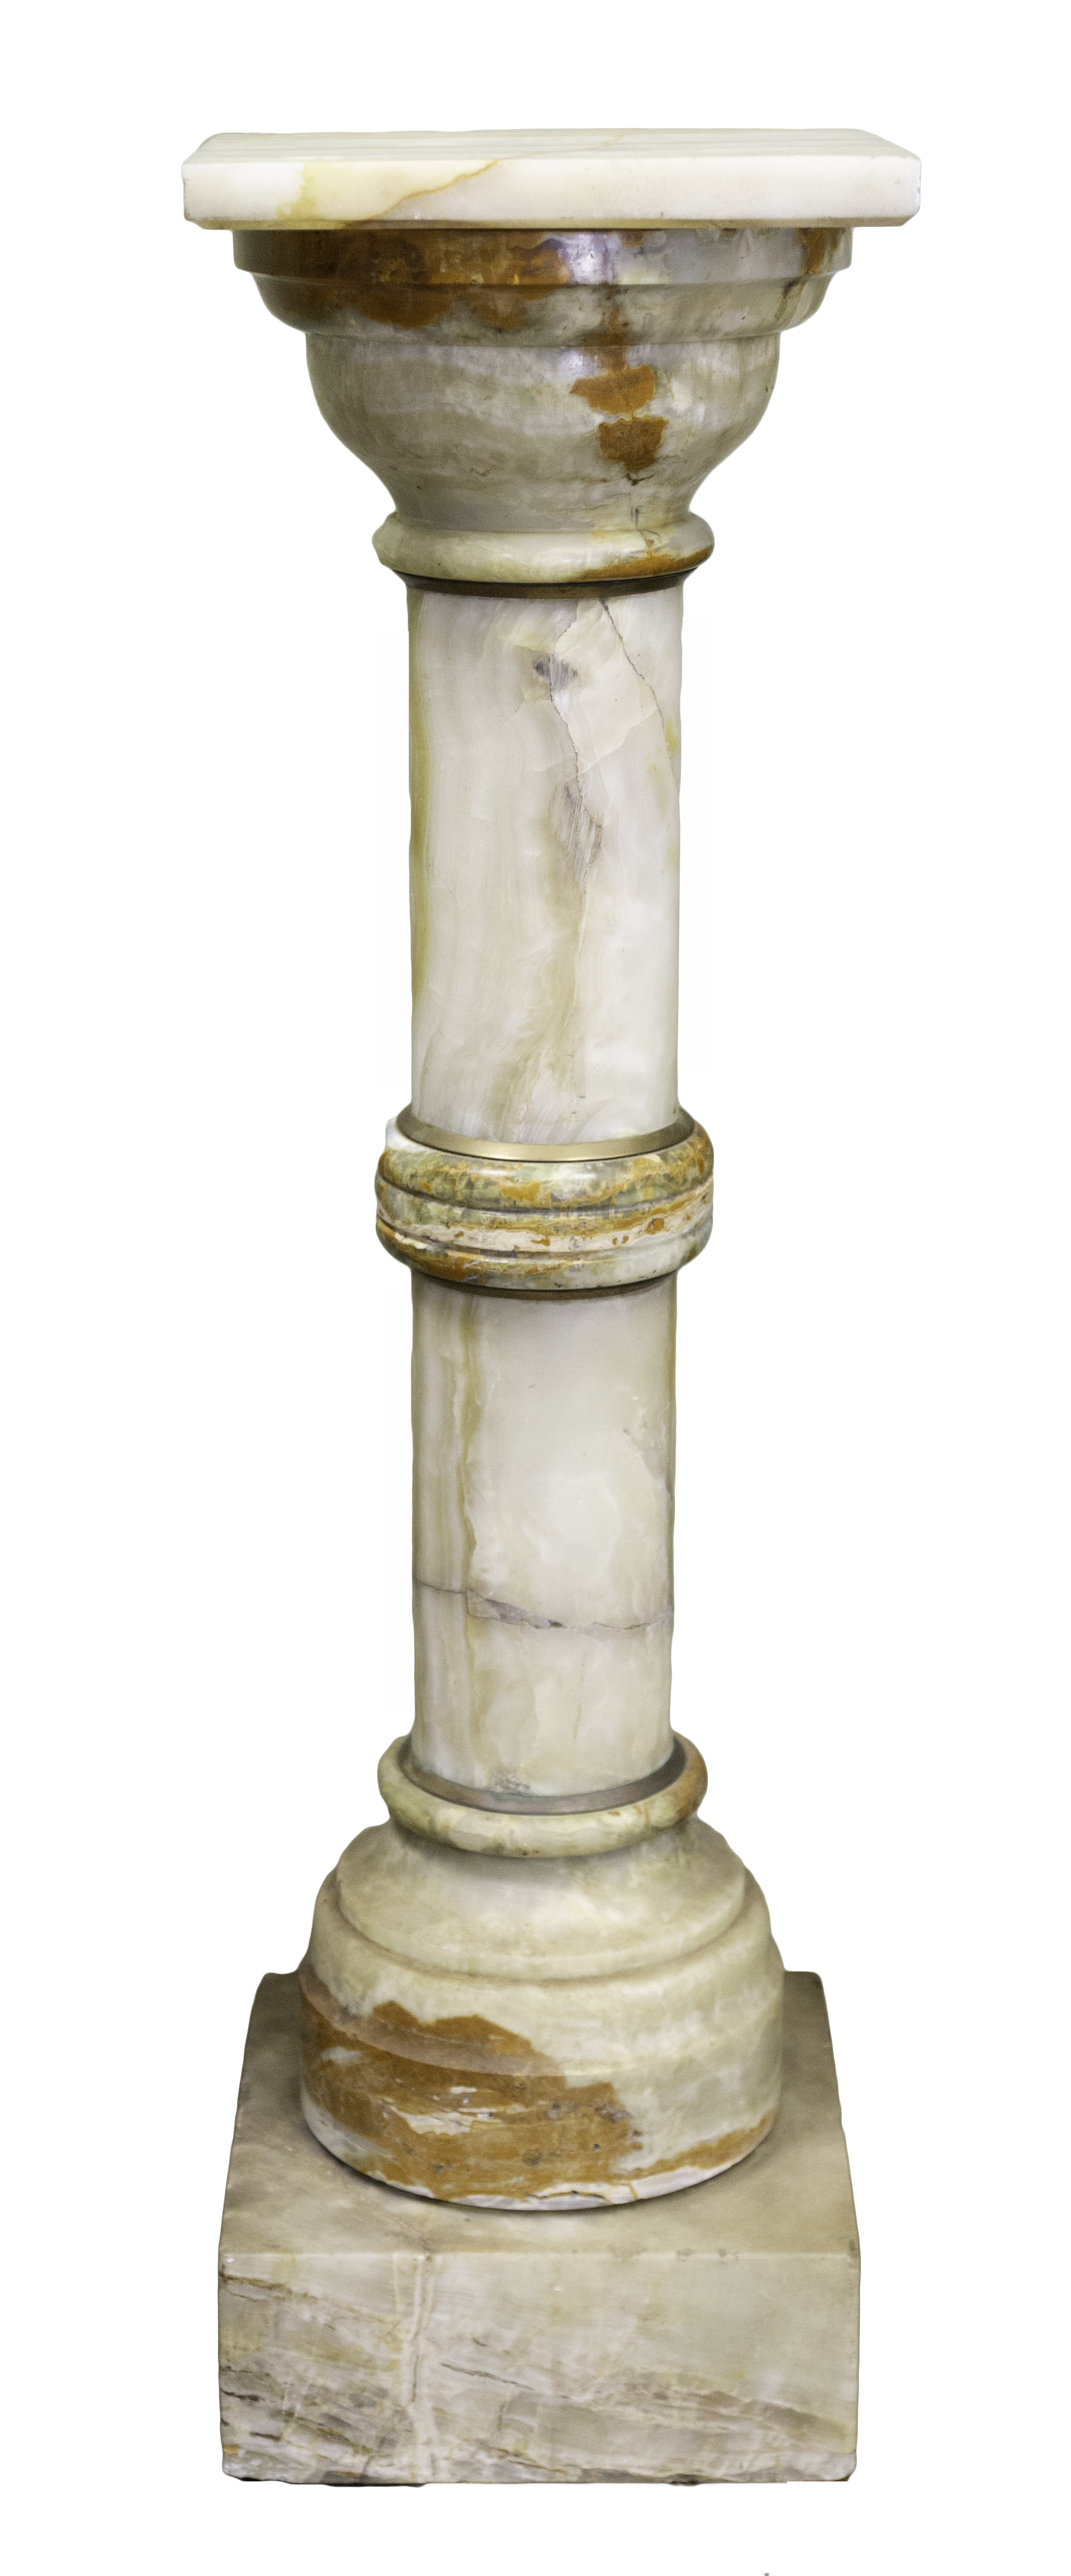 ONYX PEDESTAL 19th century, with